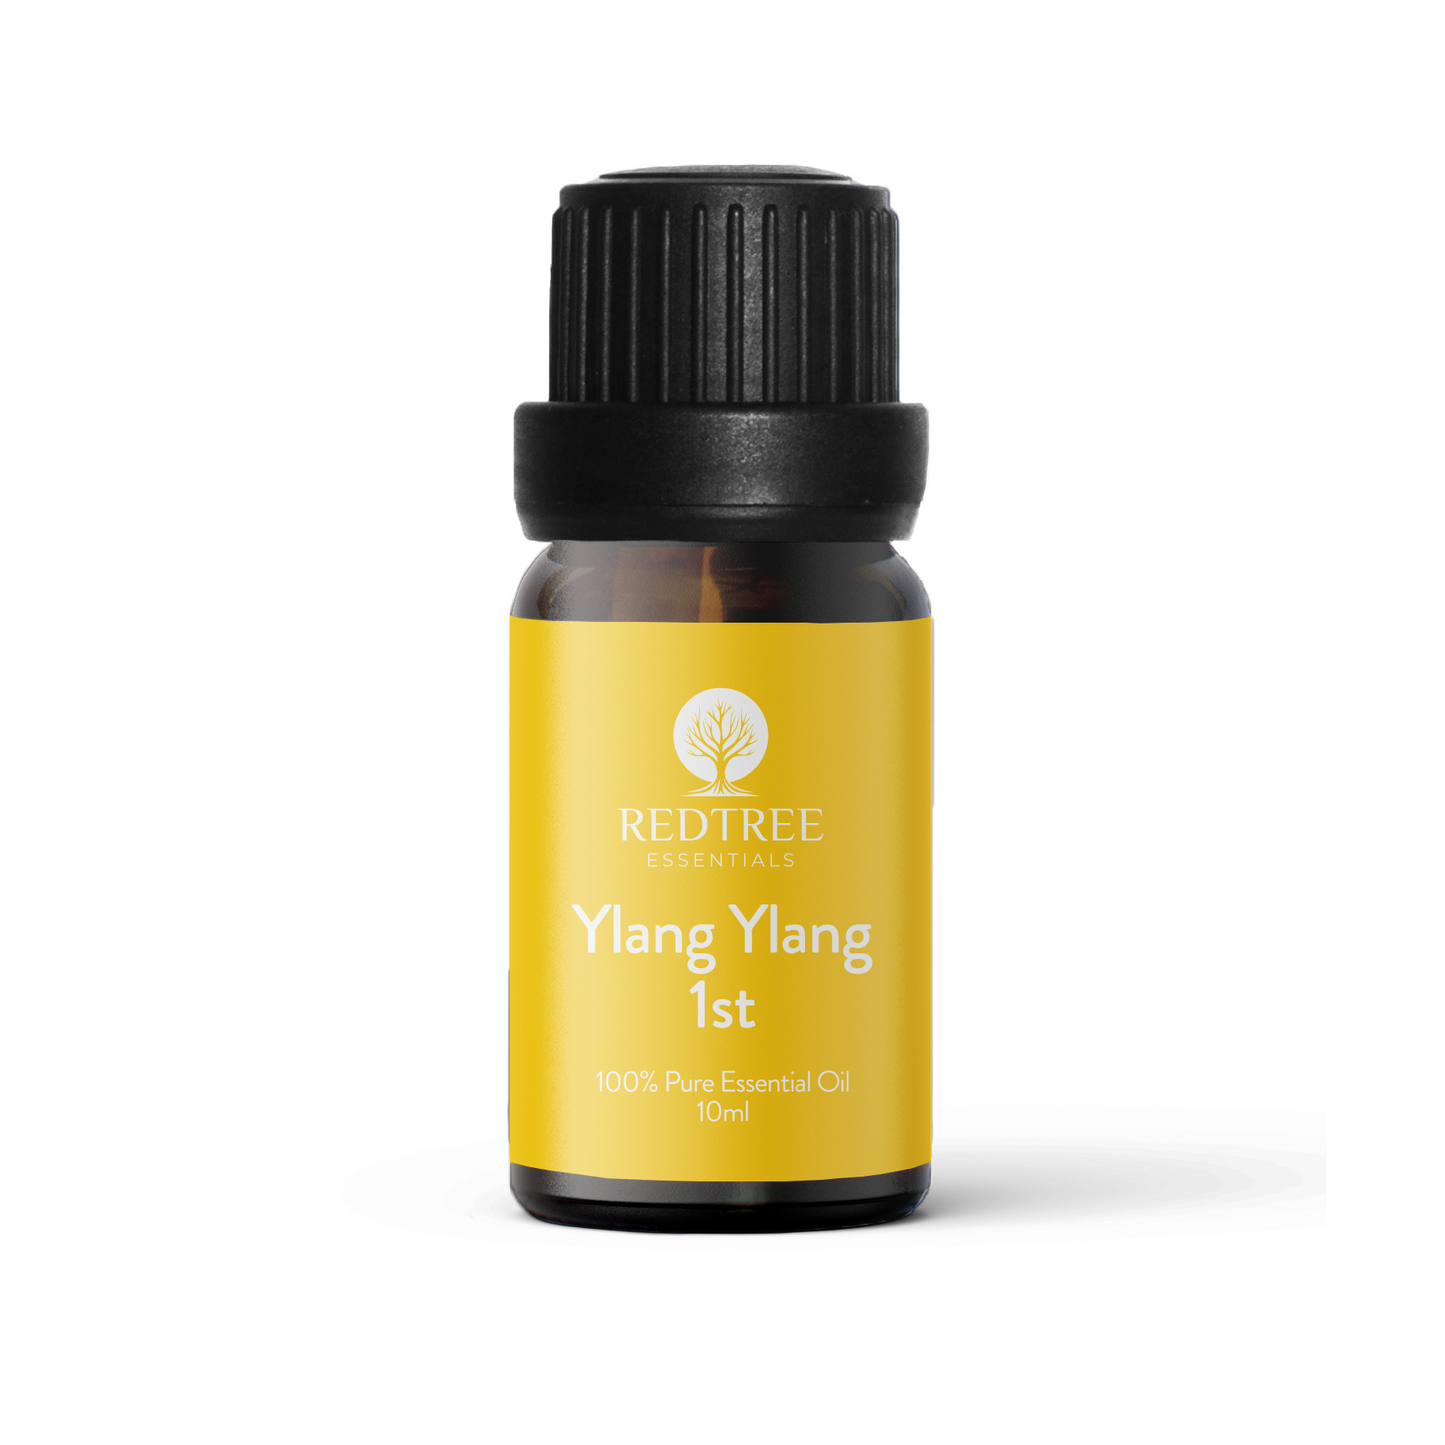 Ylang Ylang 1st 100% Pure Essential Oil - 10ml